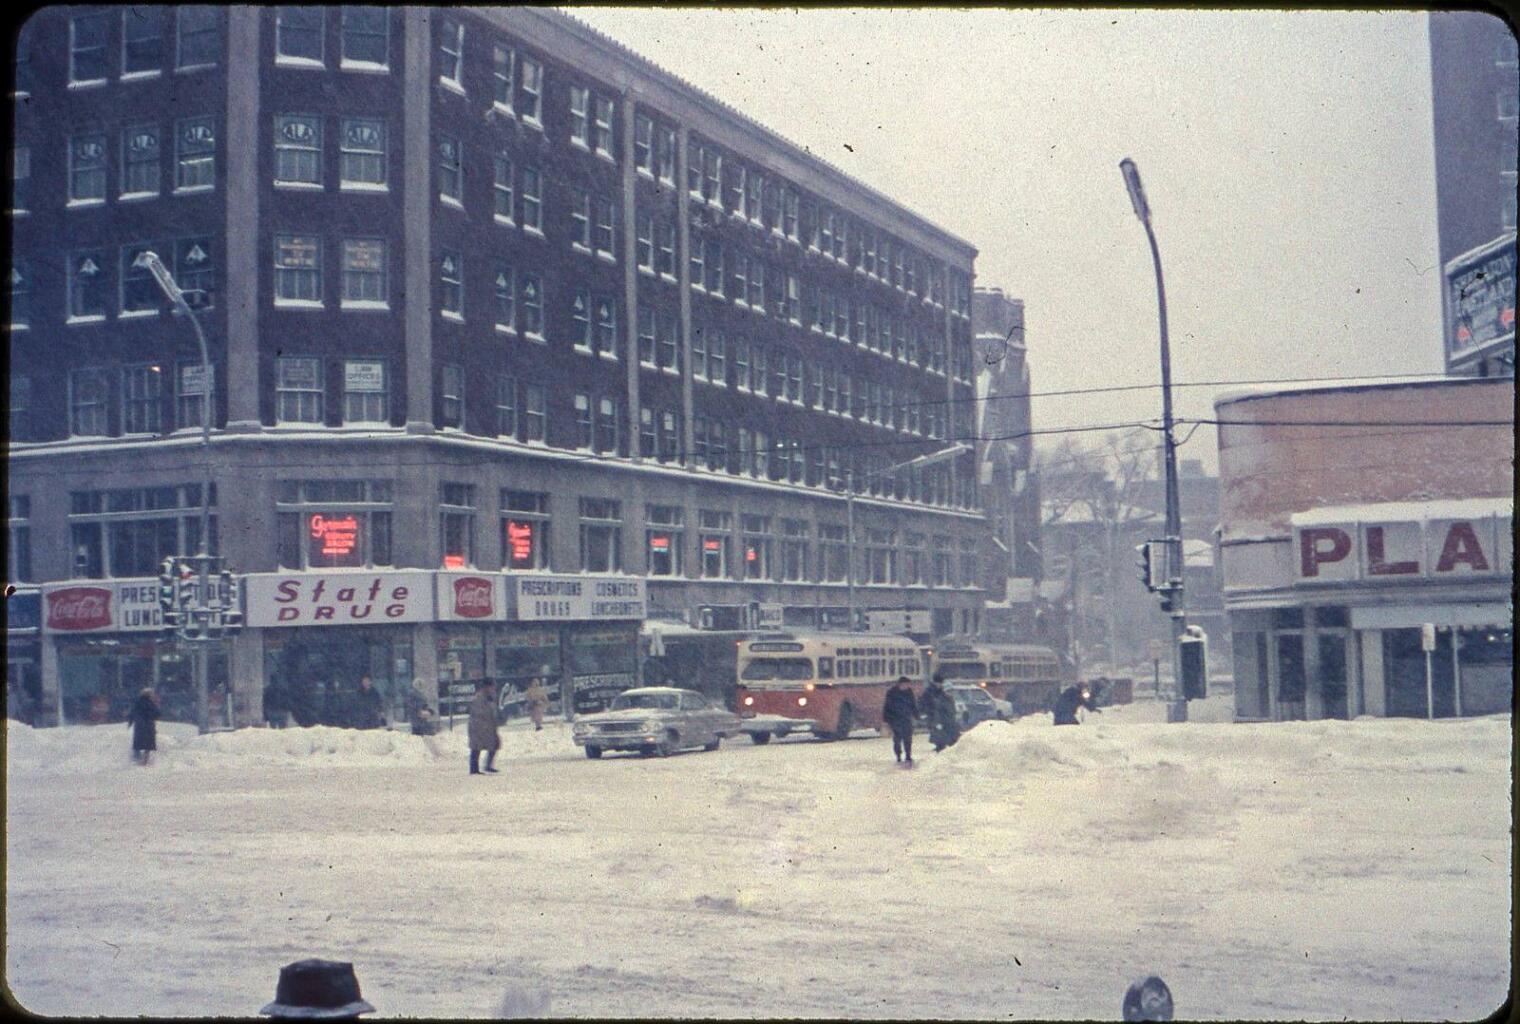 Congress Square Pictured in 1966